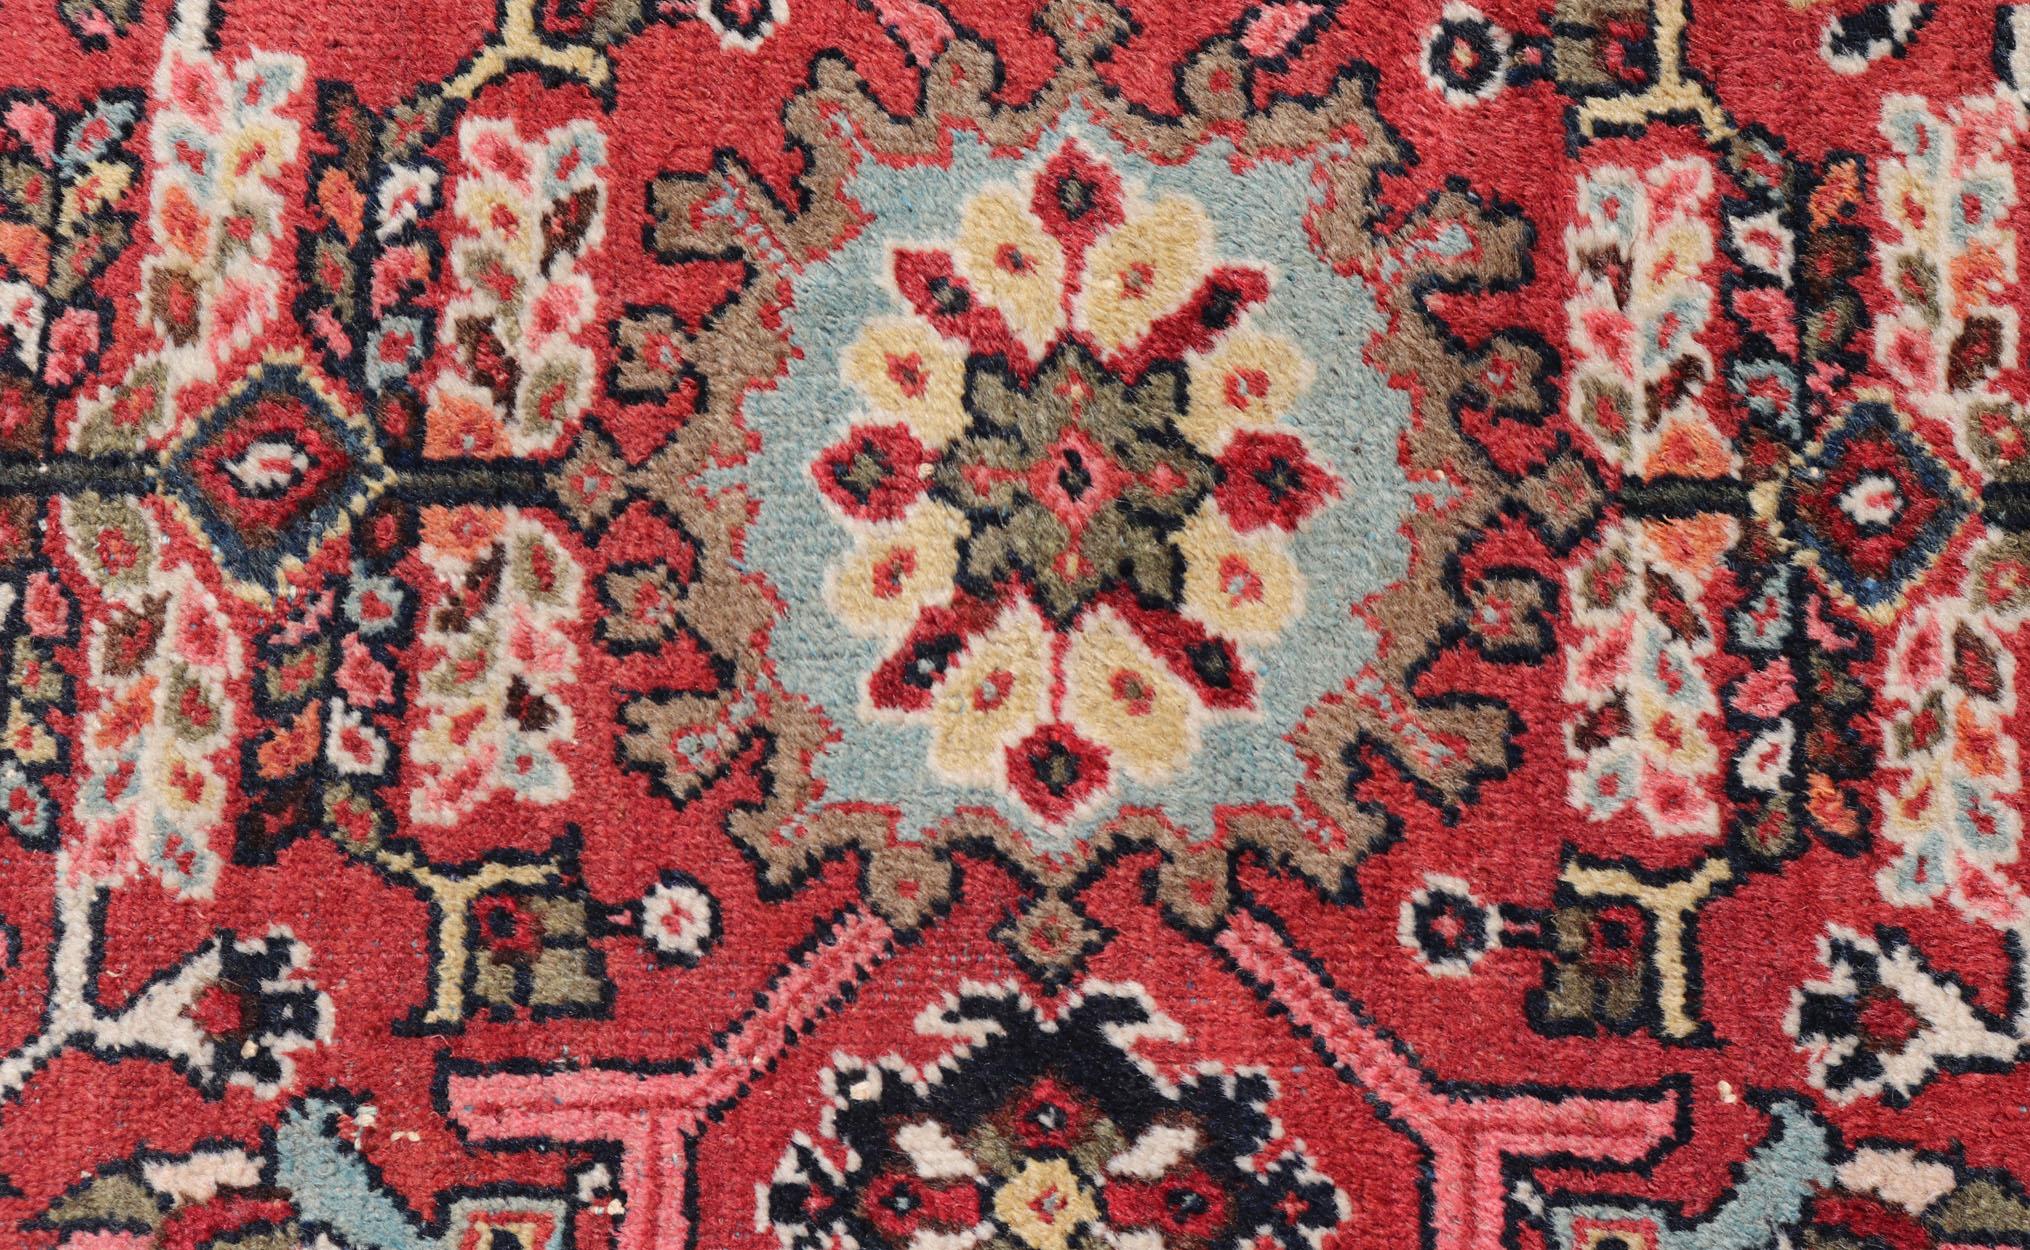 Persian semi antique Mahal rug with medallion design in red with jewel tones
Keivan Woven Arts / rug PTA-200712, country of origin / type: Iran / Sultanabad, circa mid-20th century
Measures: 7'1 x 10'7.